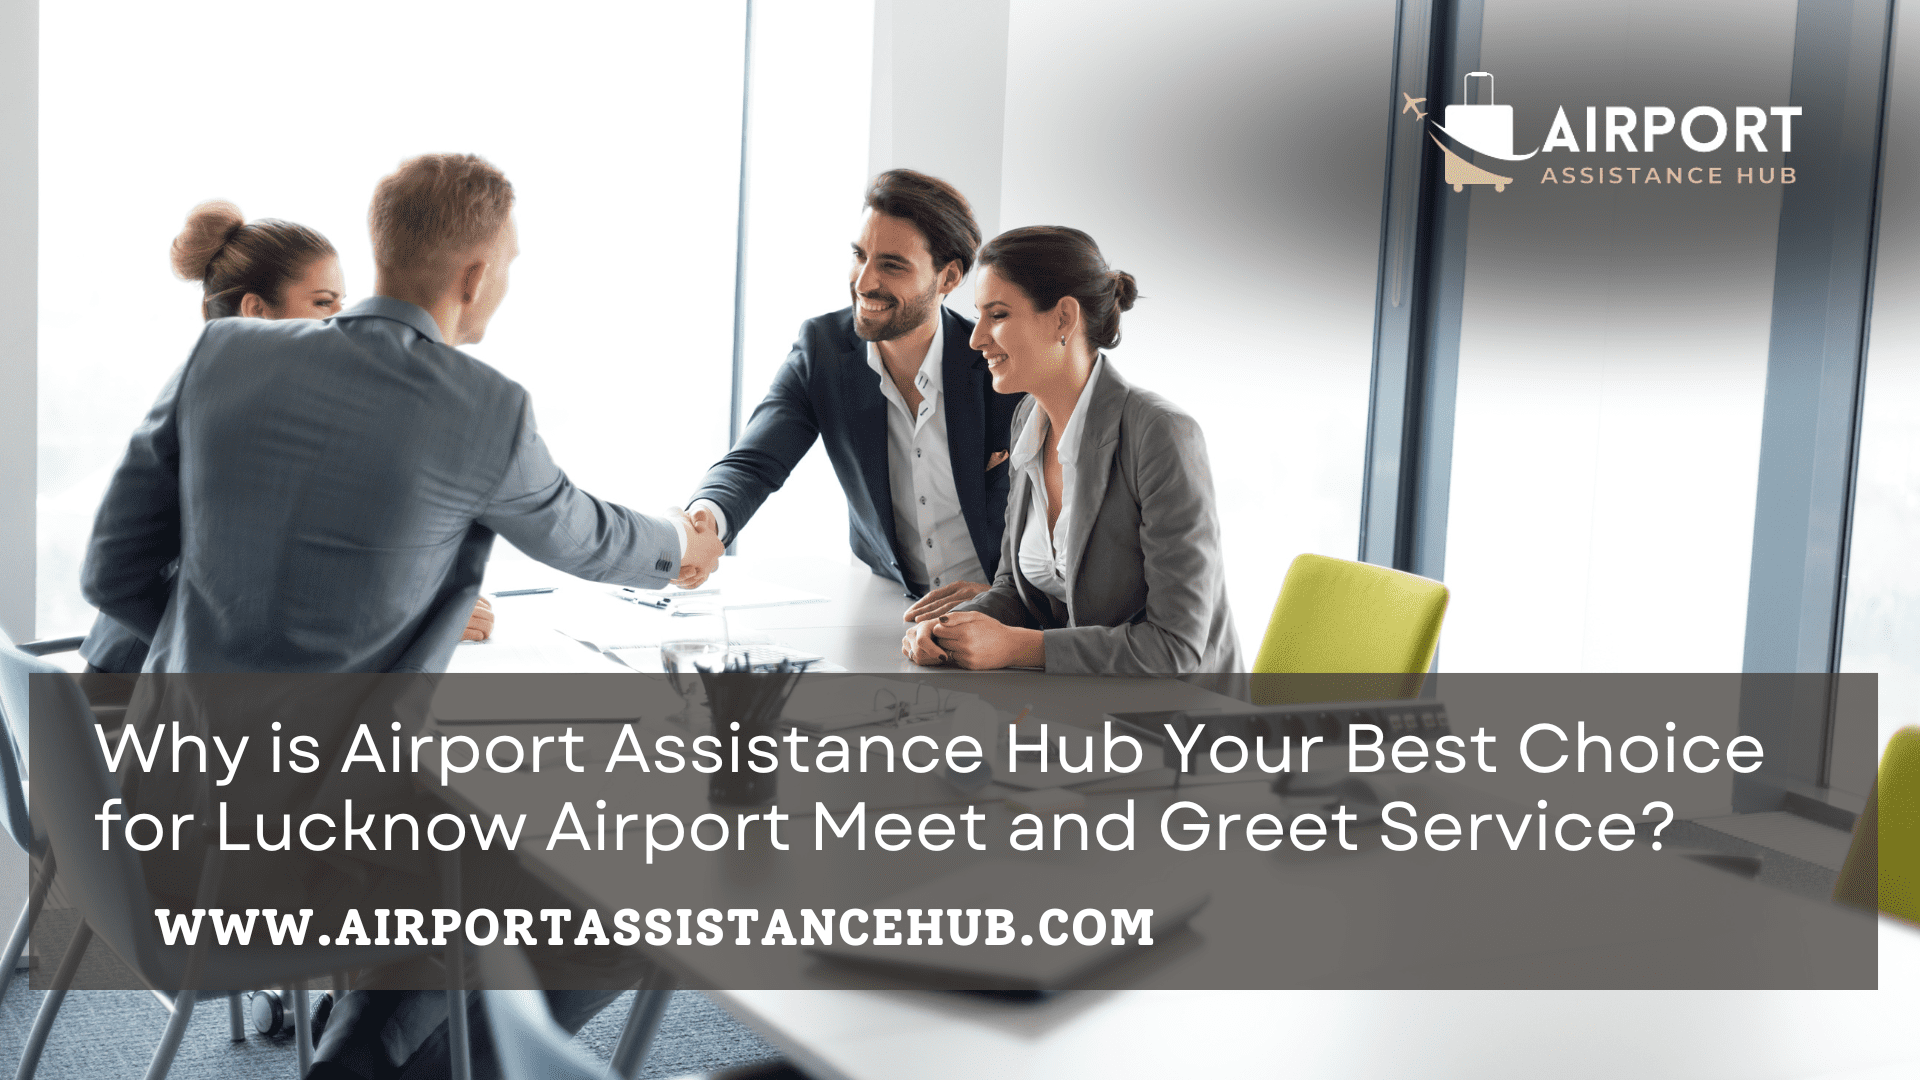 Why is Airport Assistance Hub Your Best Choice for Lucknow Airport Meet and Greet Service?